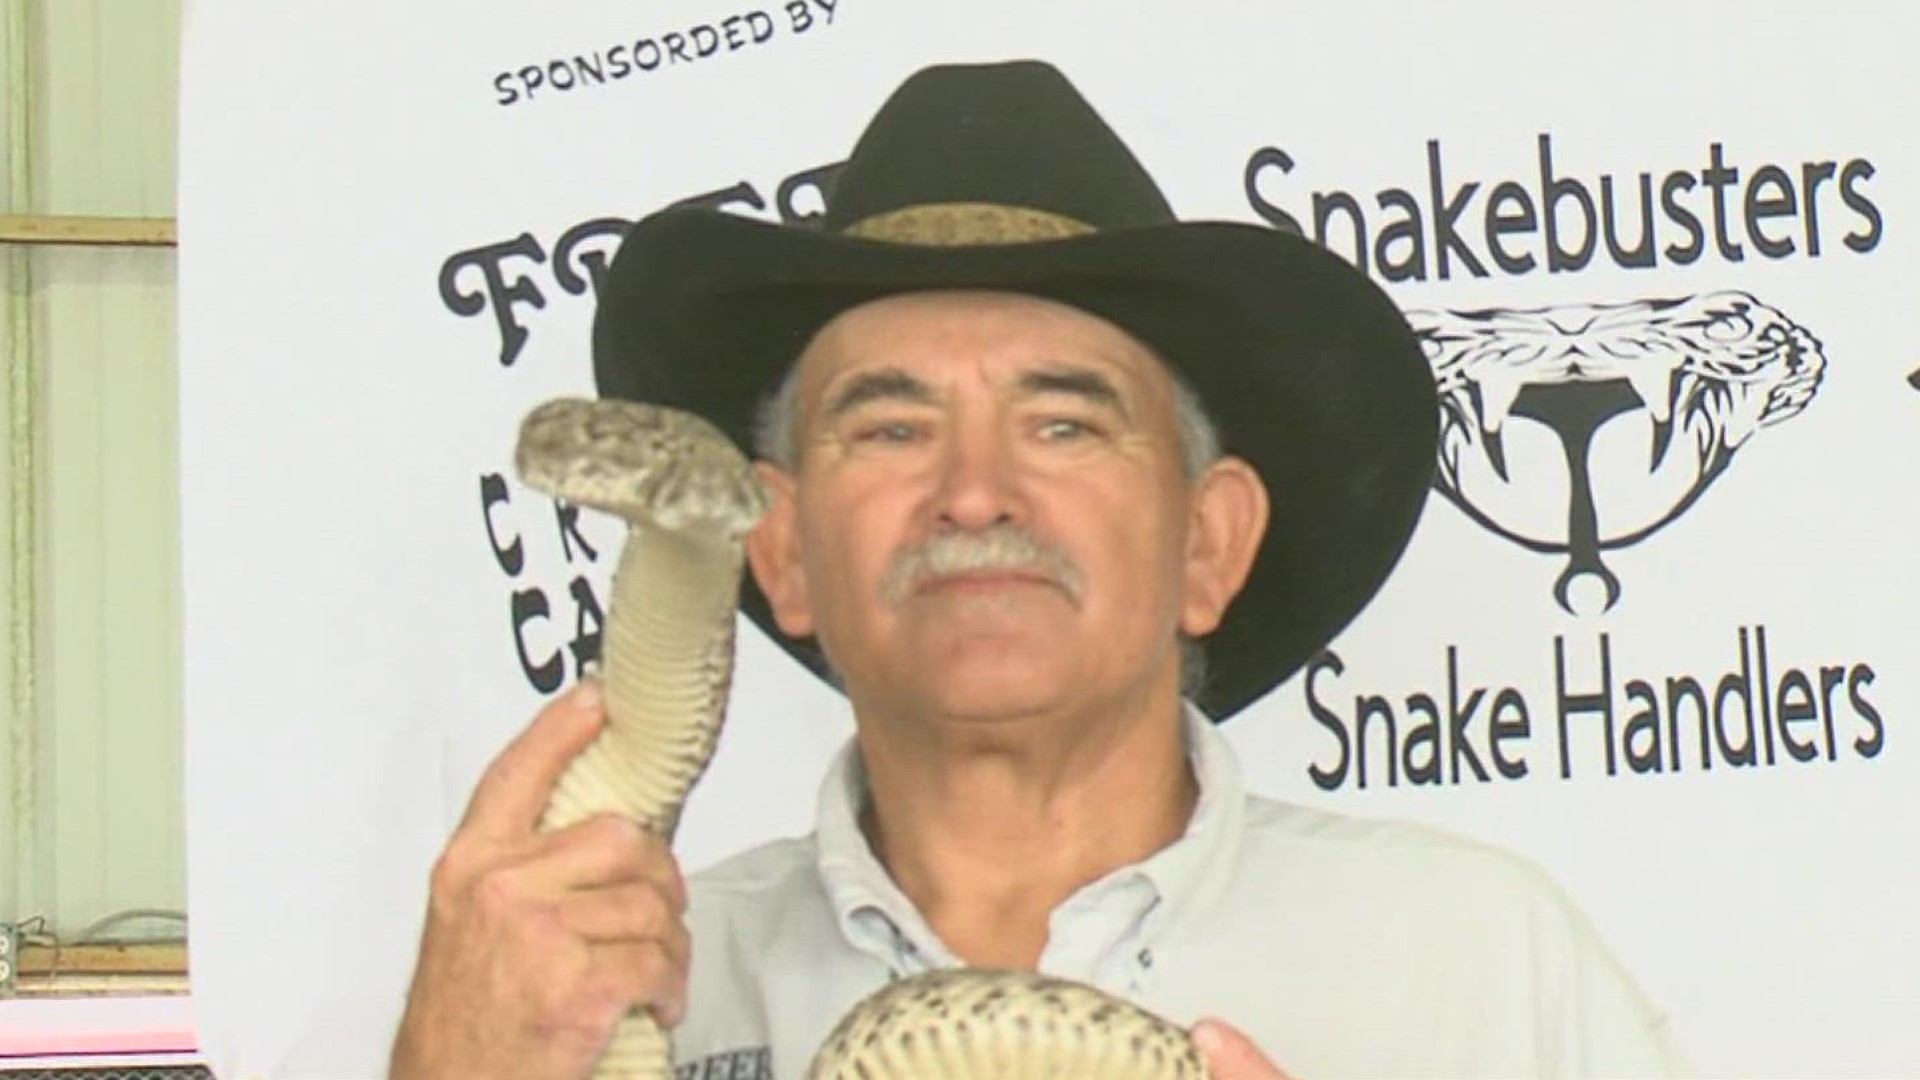 Because Freer is such a rattlesnake dominant area, it is the city's largest festival of the year.